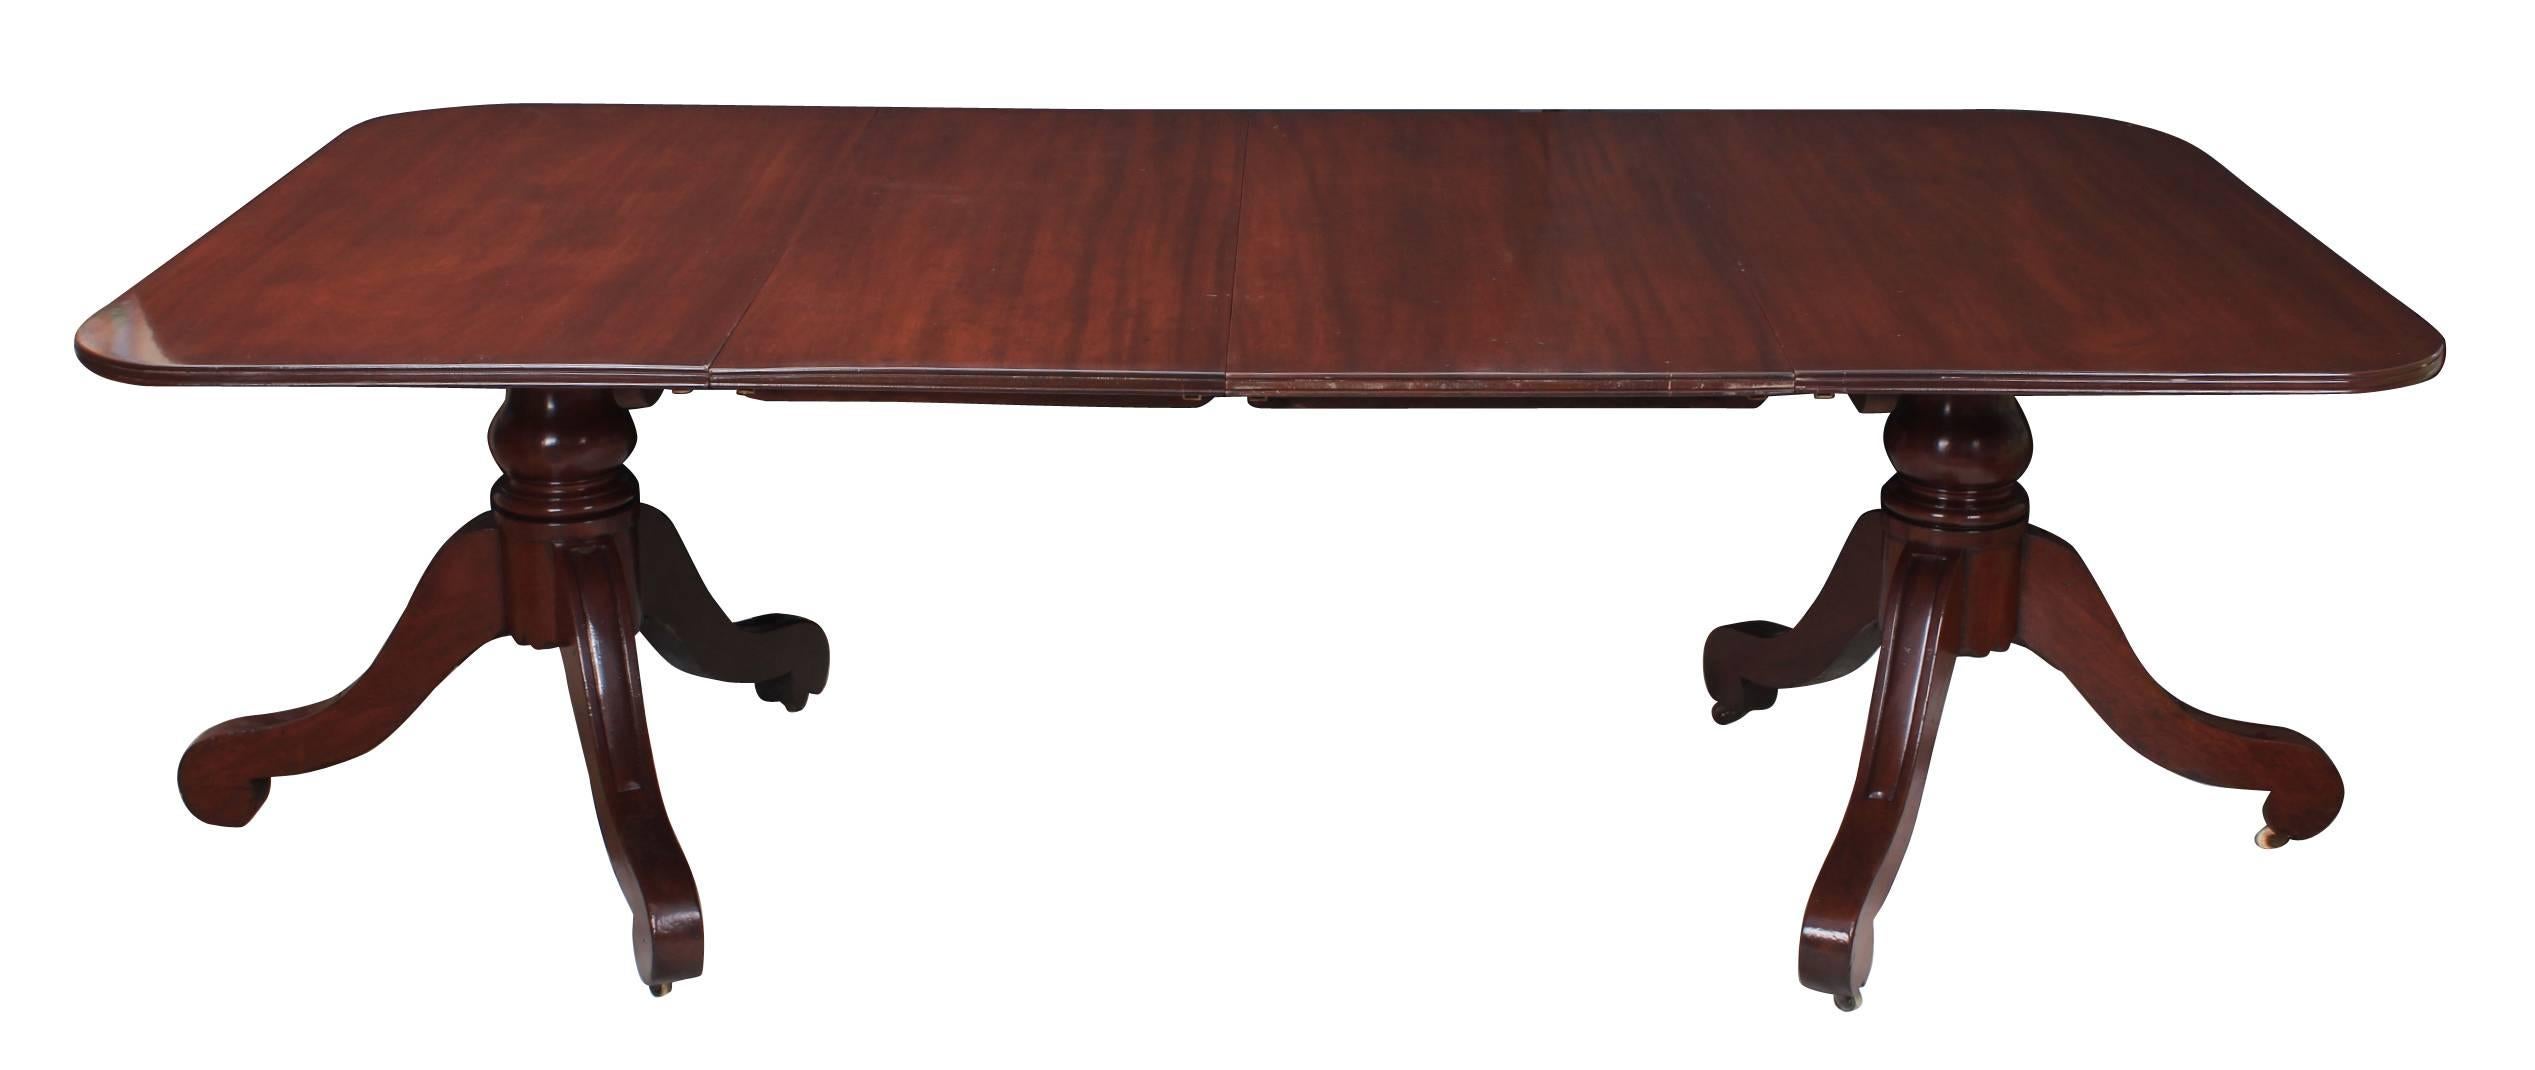 English, circa 1810.
This twin pillar dining table is in good condition, ready for use in the home.
A lovely mahogany tabletop with two additional leaves.
On two triform pedestals with casters.
With restorations.
 